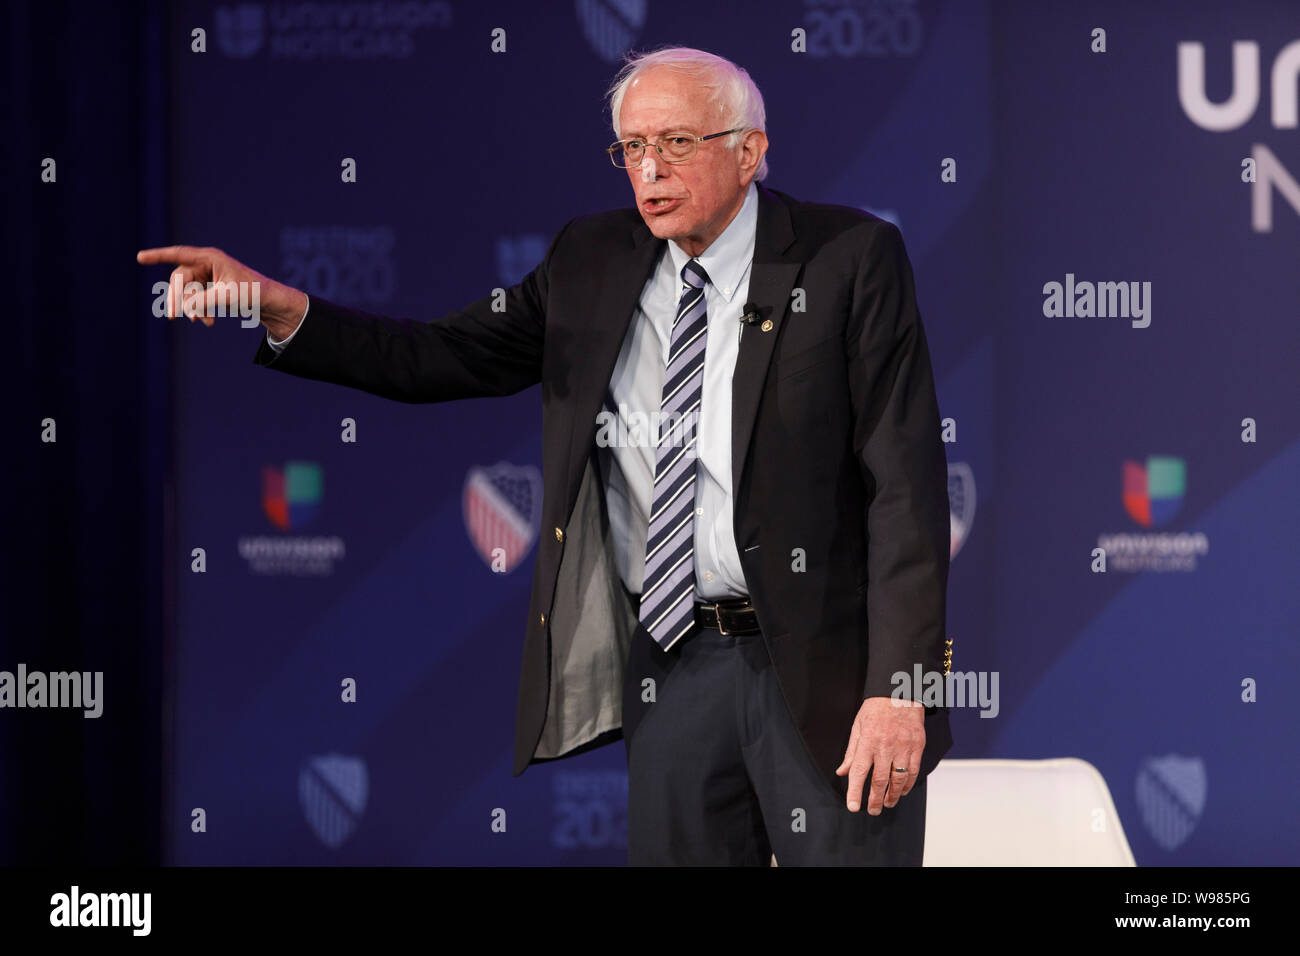 Senator Bernie Sanders, an independent from Vermont and 2020 presidential candidate, points while speaking on stage at an event Stock Photo